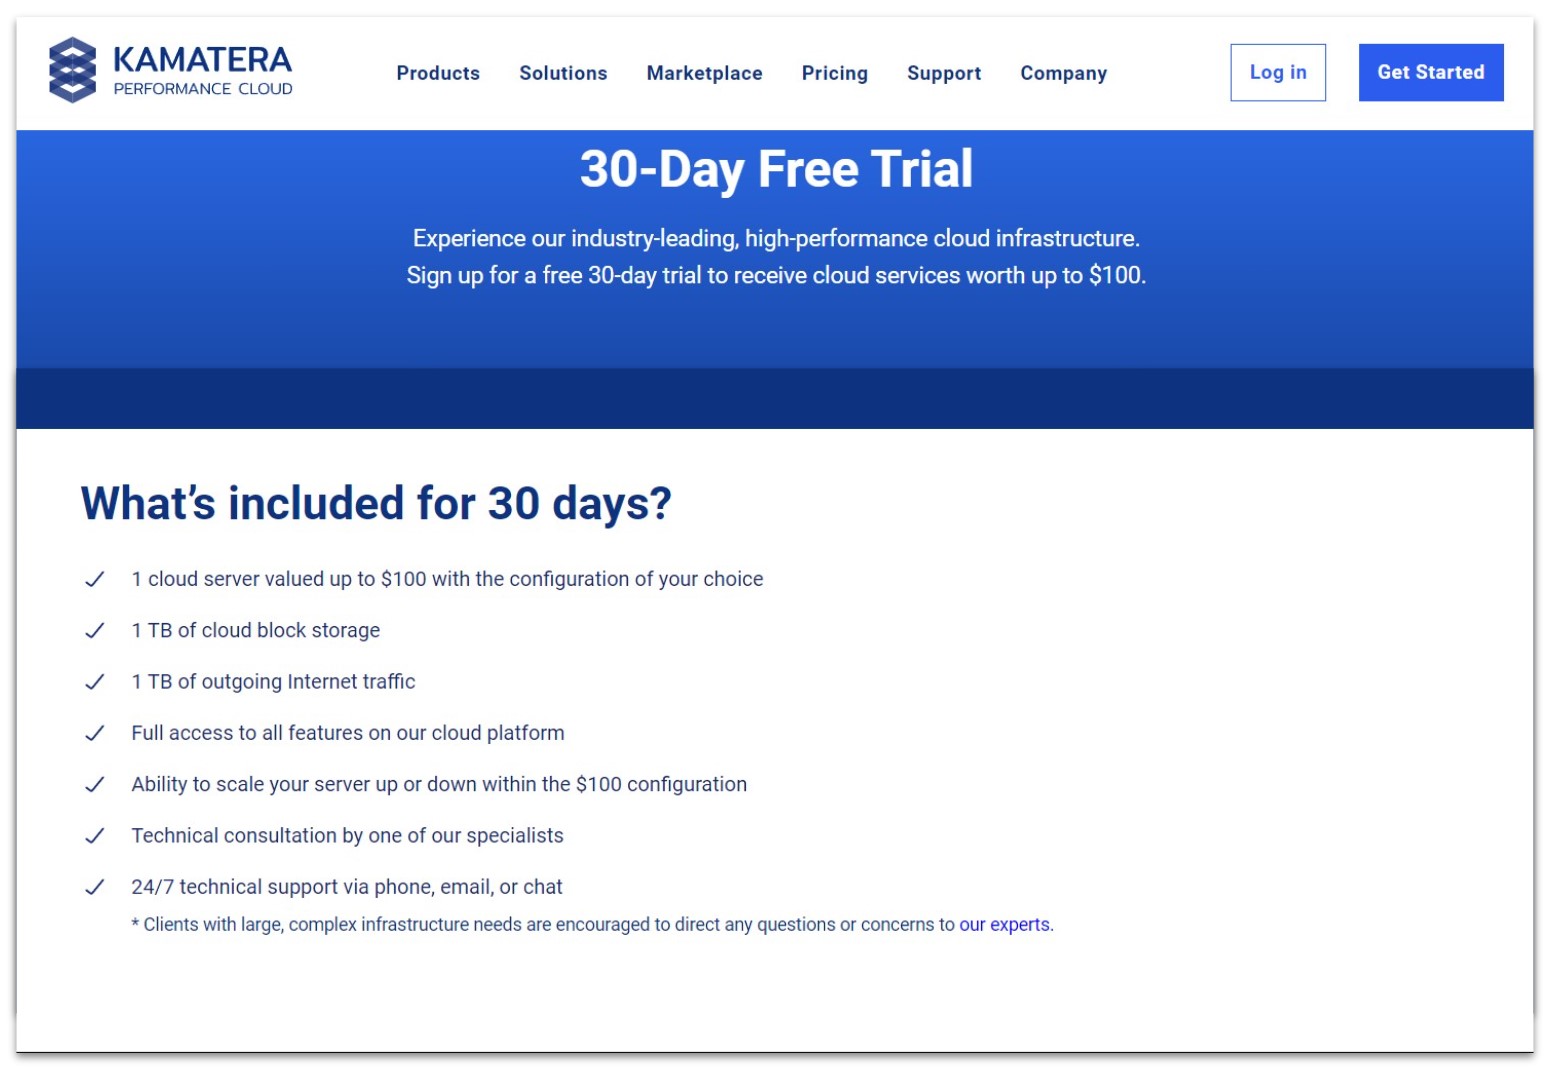 Kamatera 30-day free trial with a $100 credit offer landing page